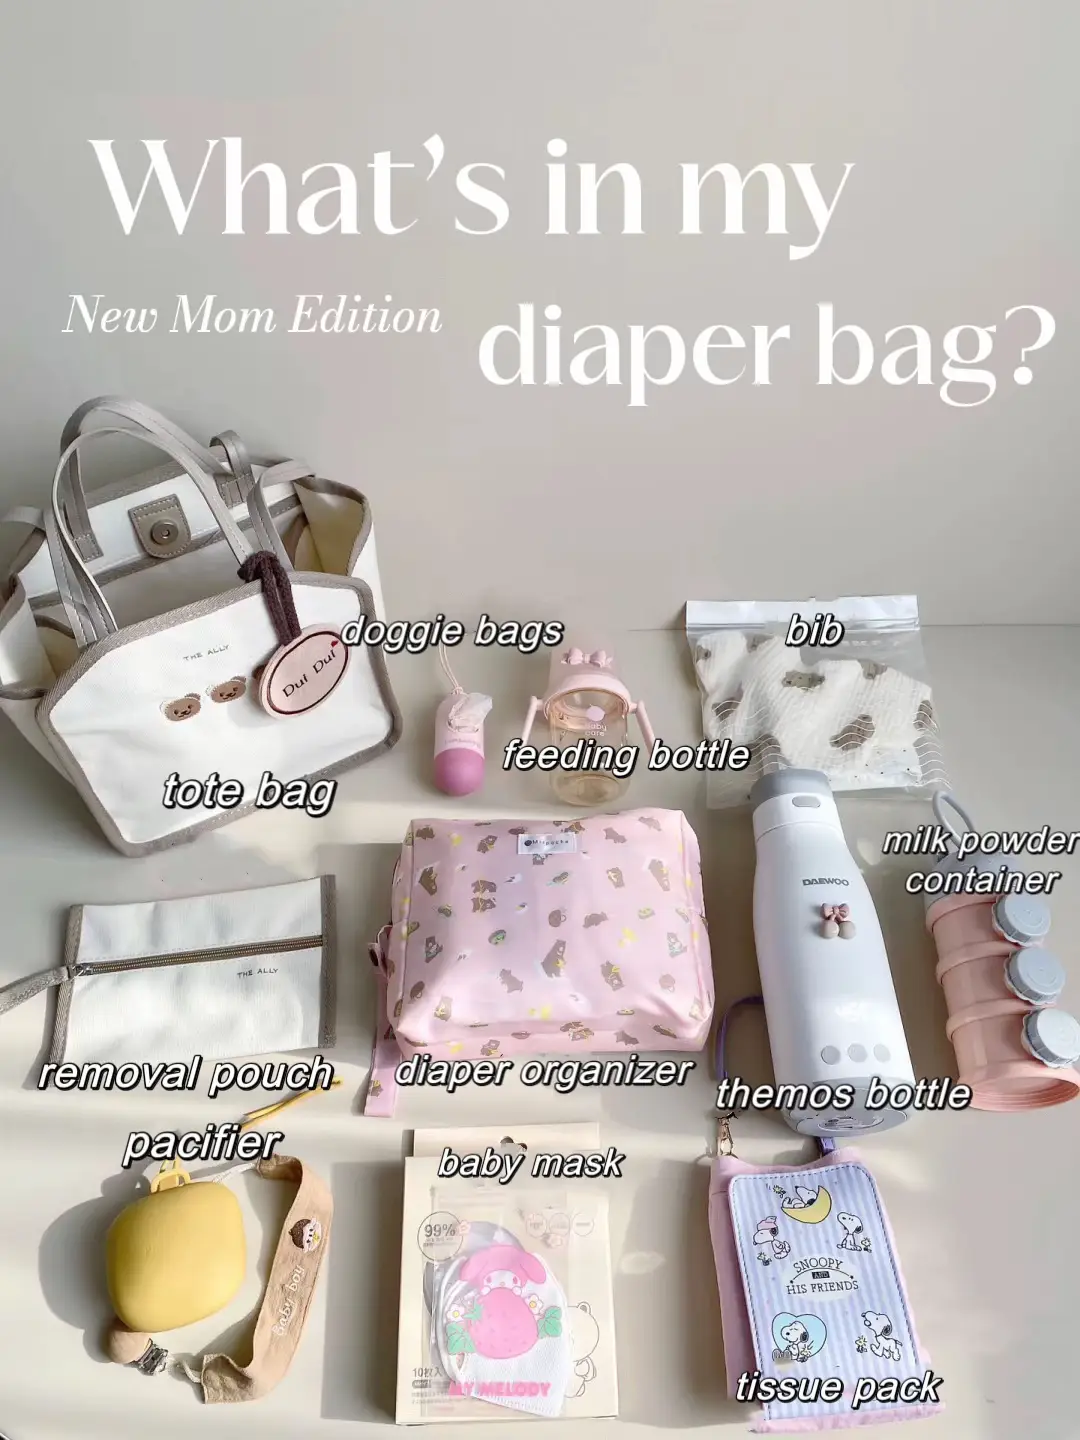 Delilah 7 Cloth Diapers with Inserts & 1 Wet Bag – Nora's Nursery